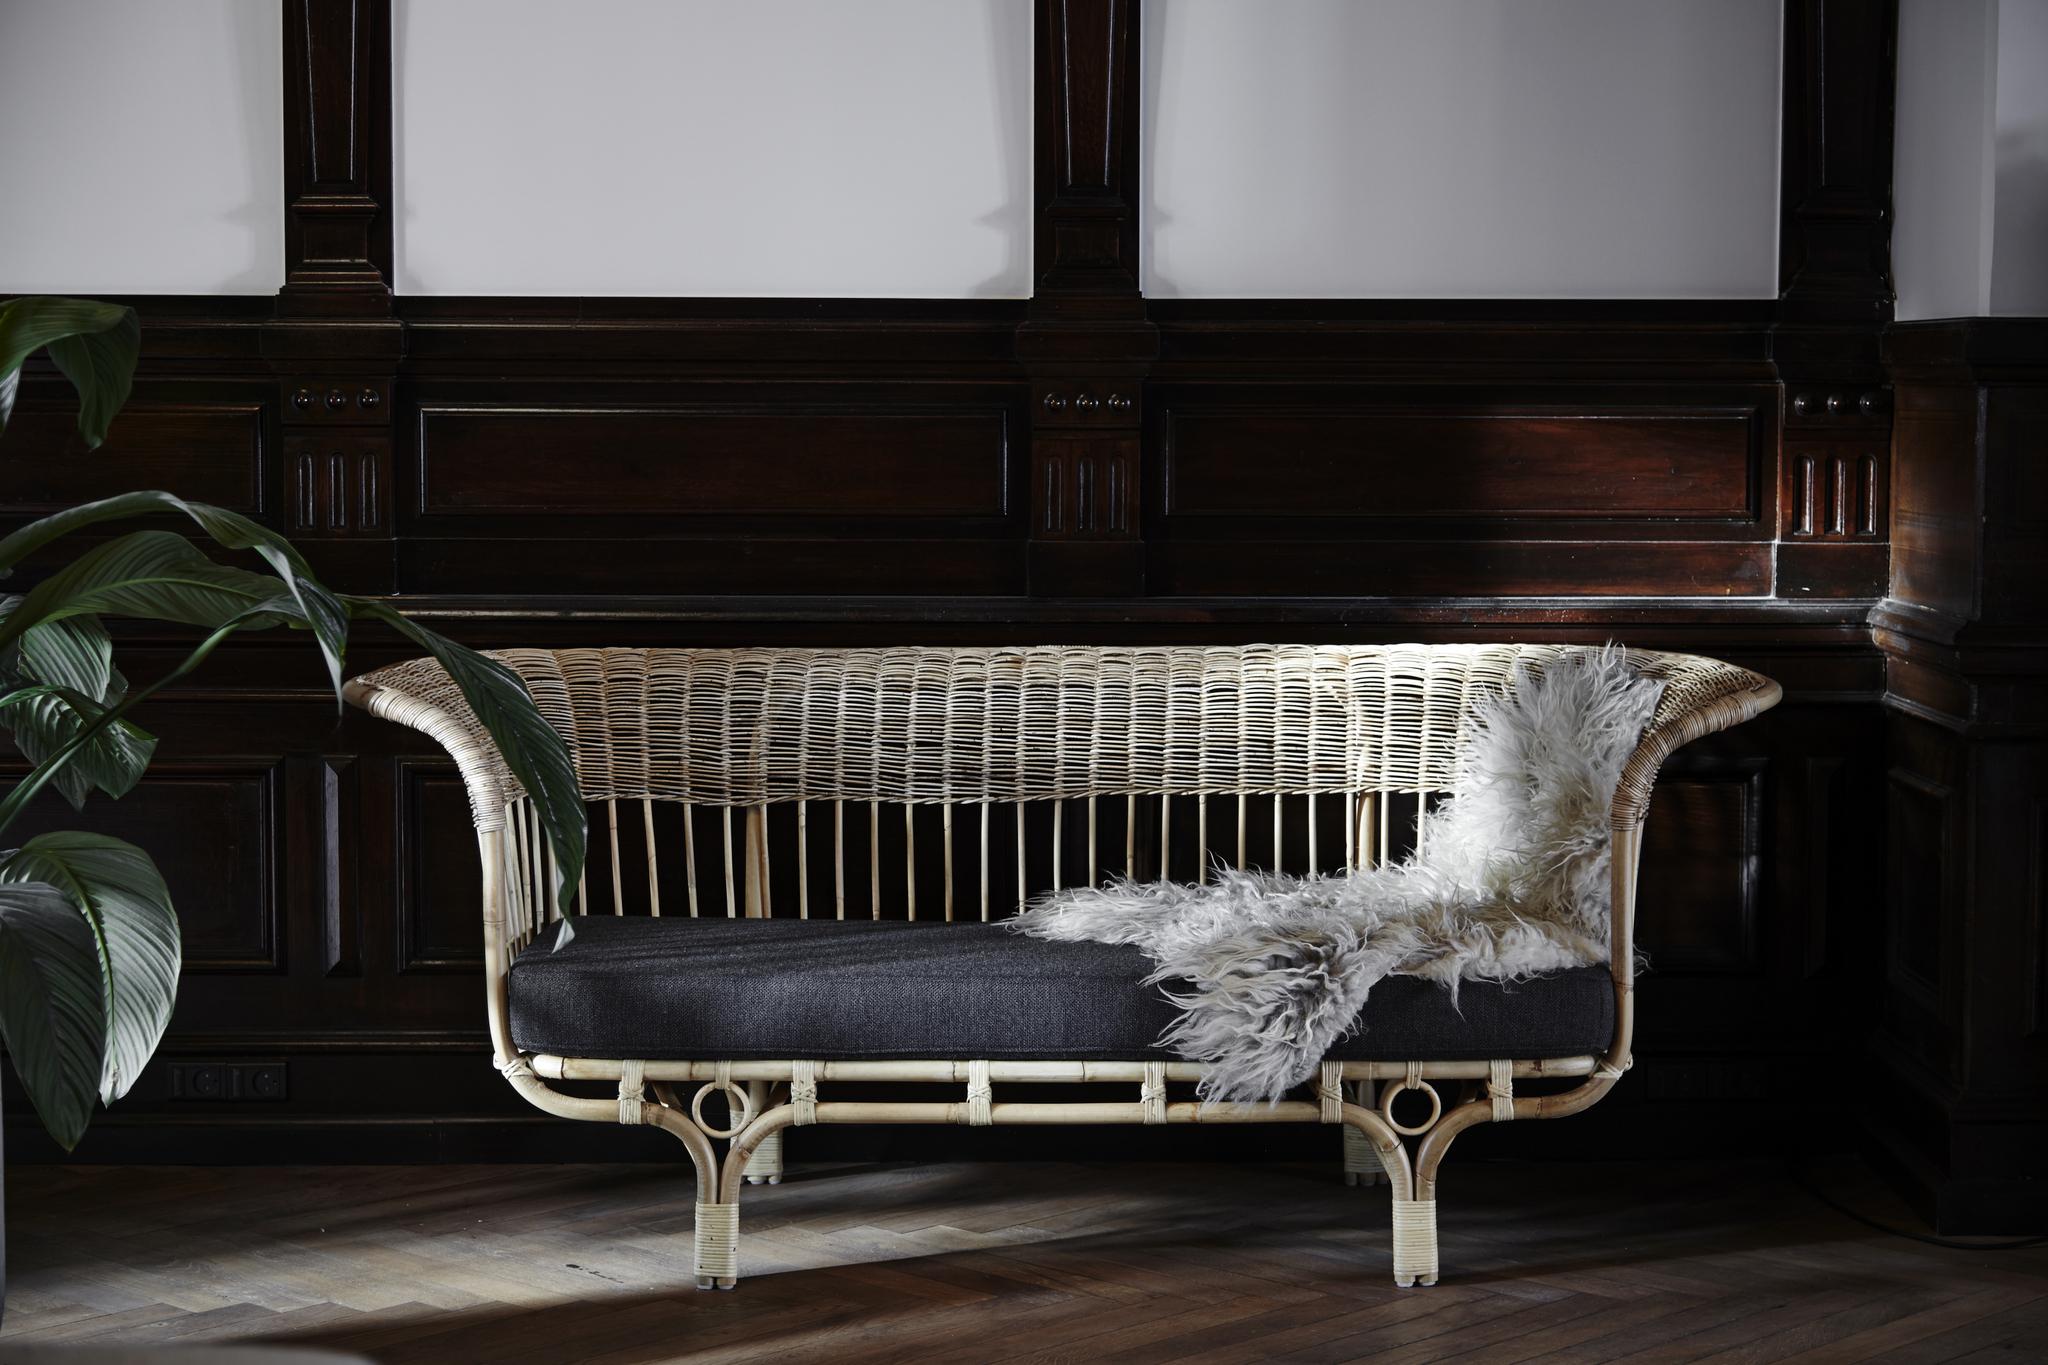 Franco Albini designed the original Belladonna Sofa made of rattan in 1951. This striking, sculptural rattan lounge sofa is truly an original and elegant work of art. With our Icons collection we revitalize iconic pieces of furniture from some of